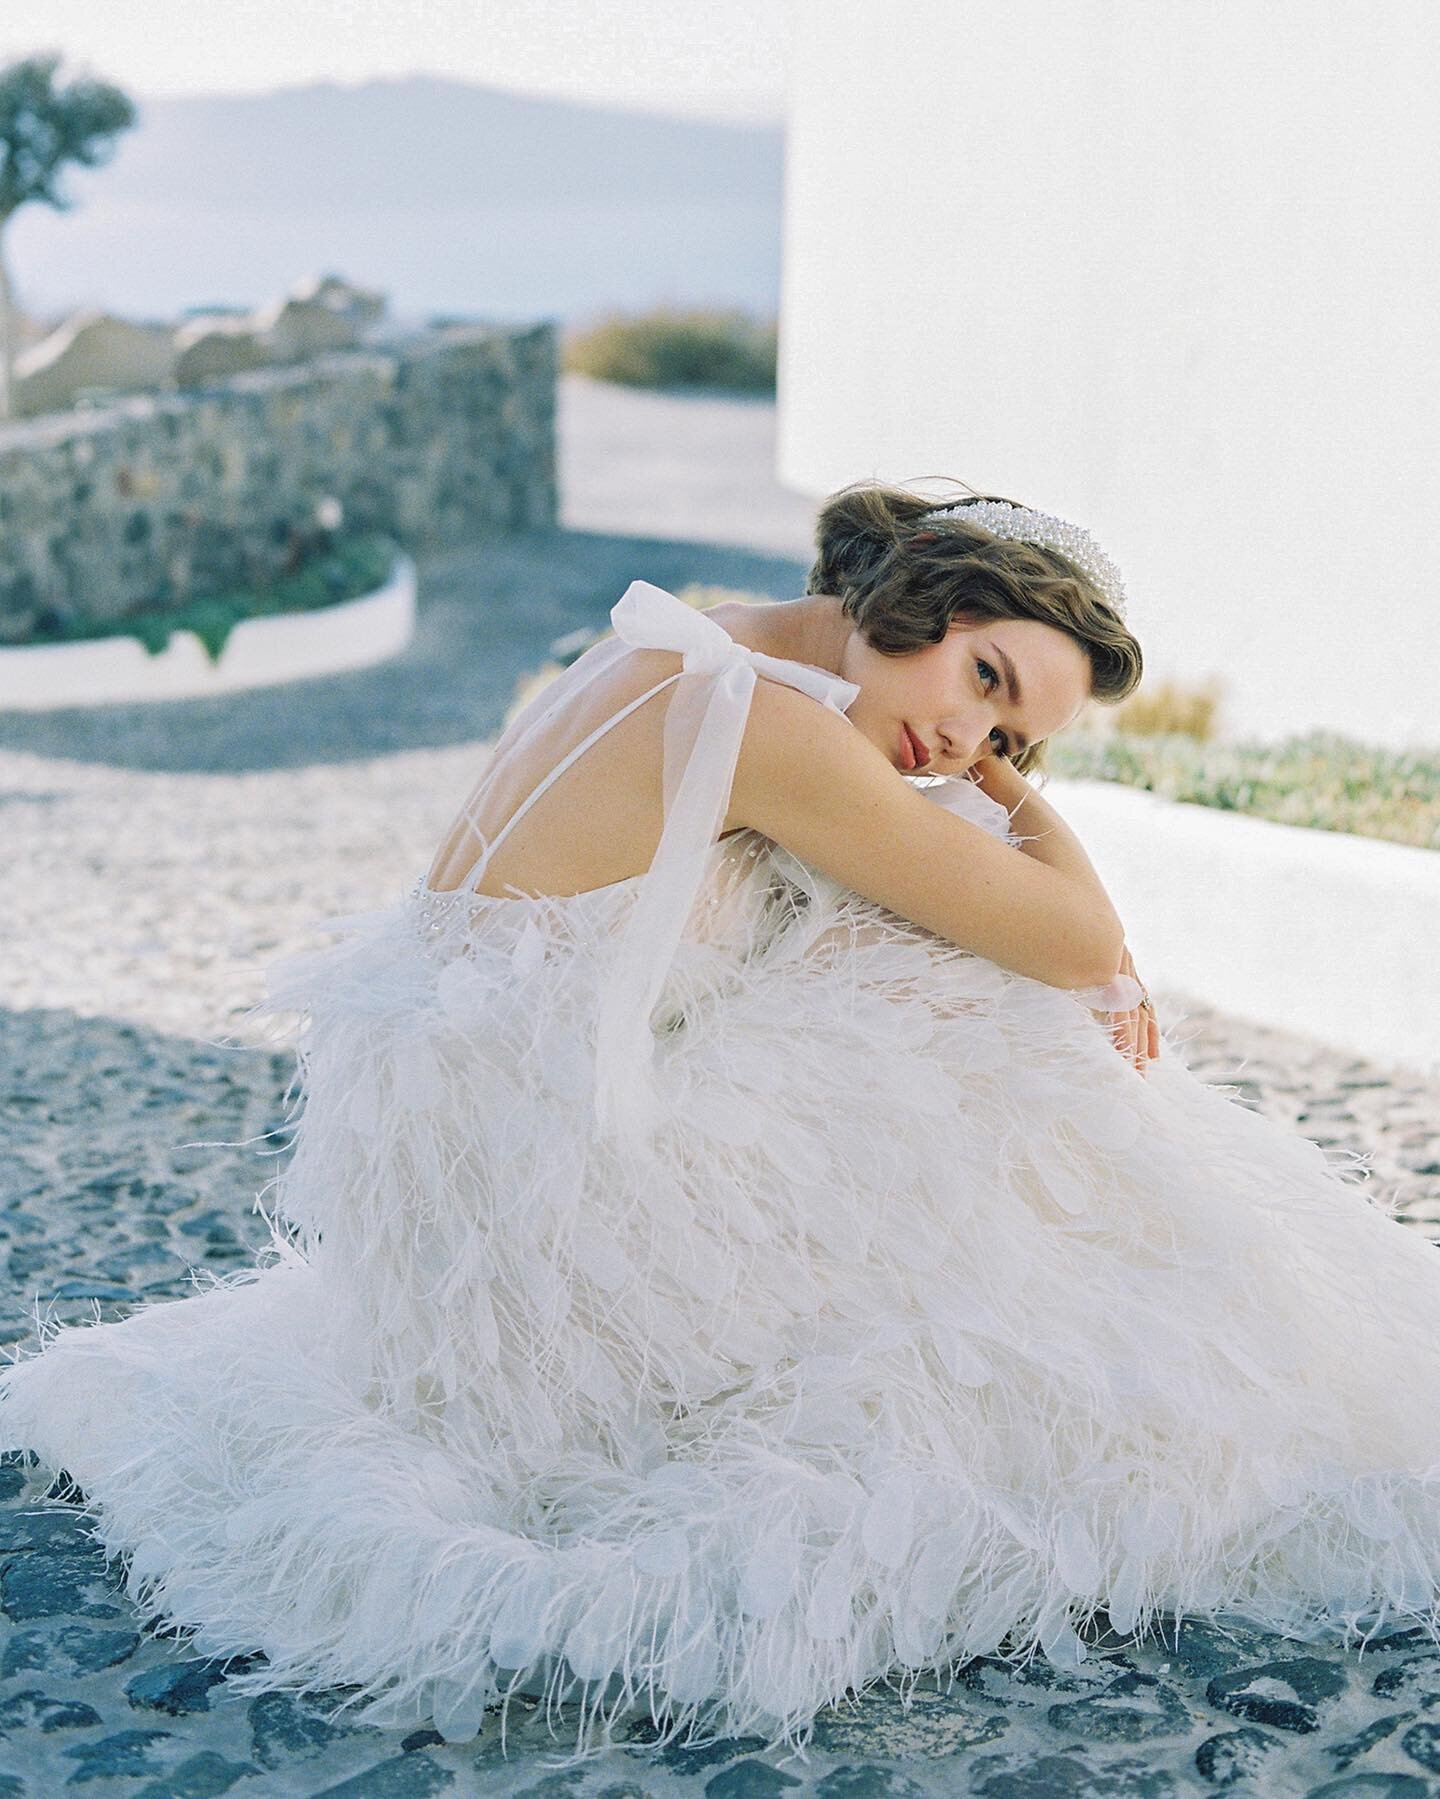 The textures and detail on this bridal gown by @maramariebridal was everything. 

Venue: Rocabella Santorini @rocabellasantorini @rocabellaweddings 
Workshop Host: AMV Retreats @amv_retreats
Wedding Planner, Styling &amp; Design: AMV Weddings @amv_we